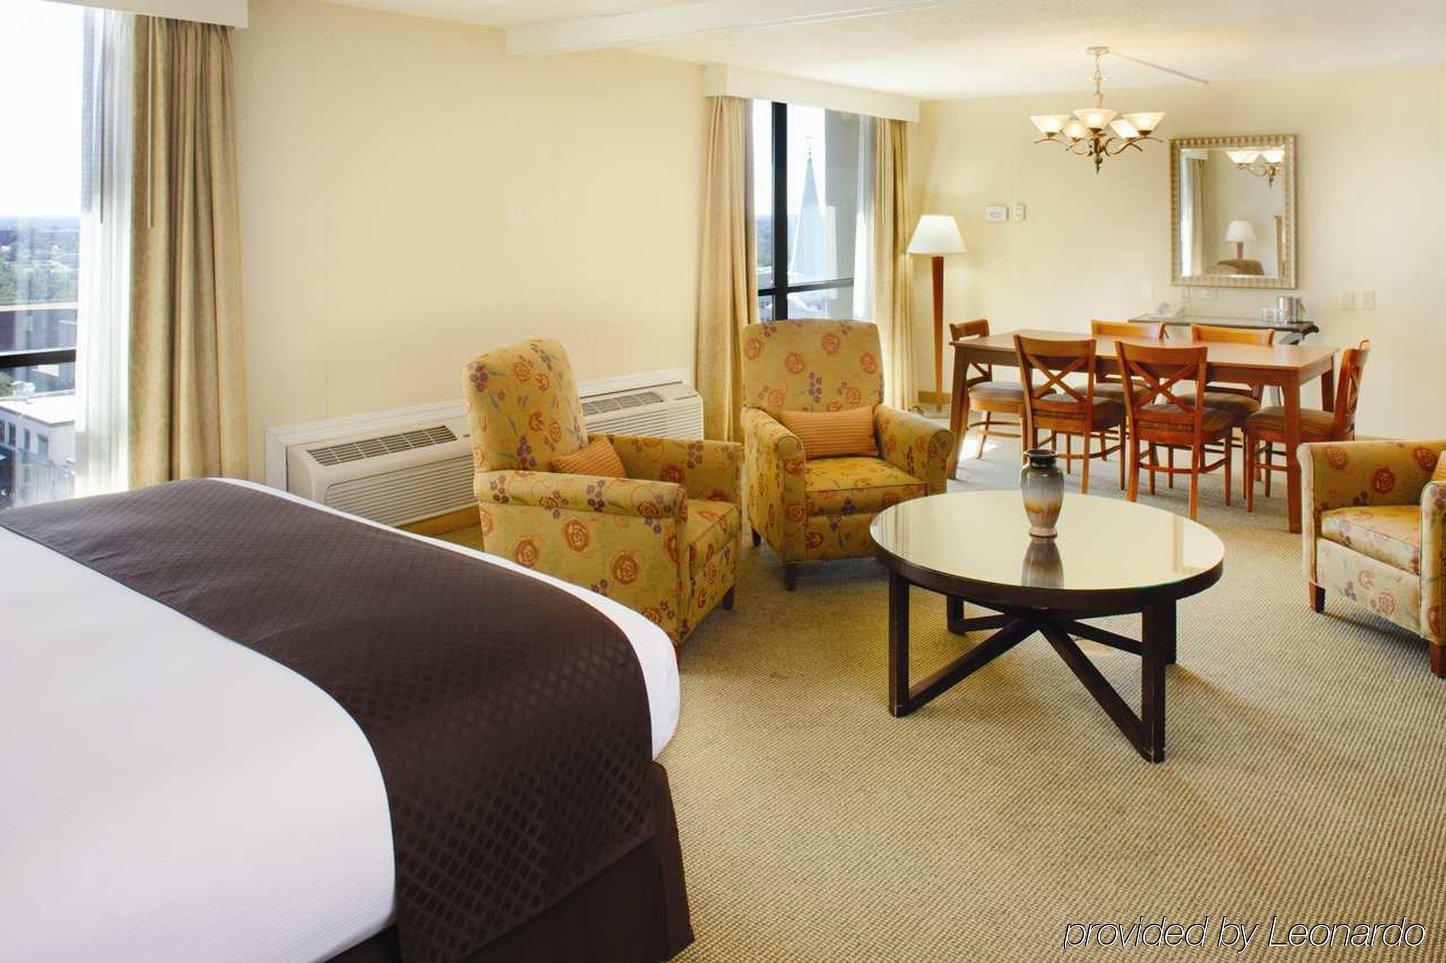 Doubletree By Hilton Hotel Tallahassee Room photo